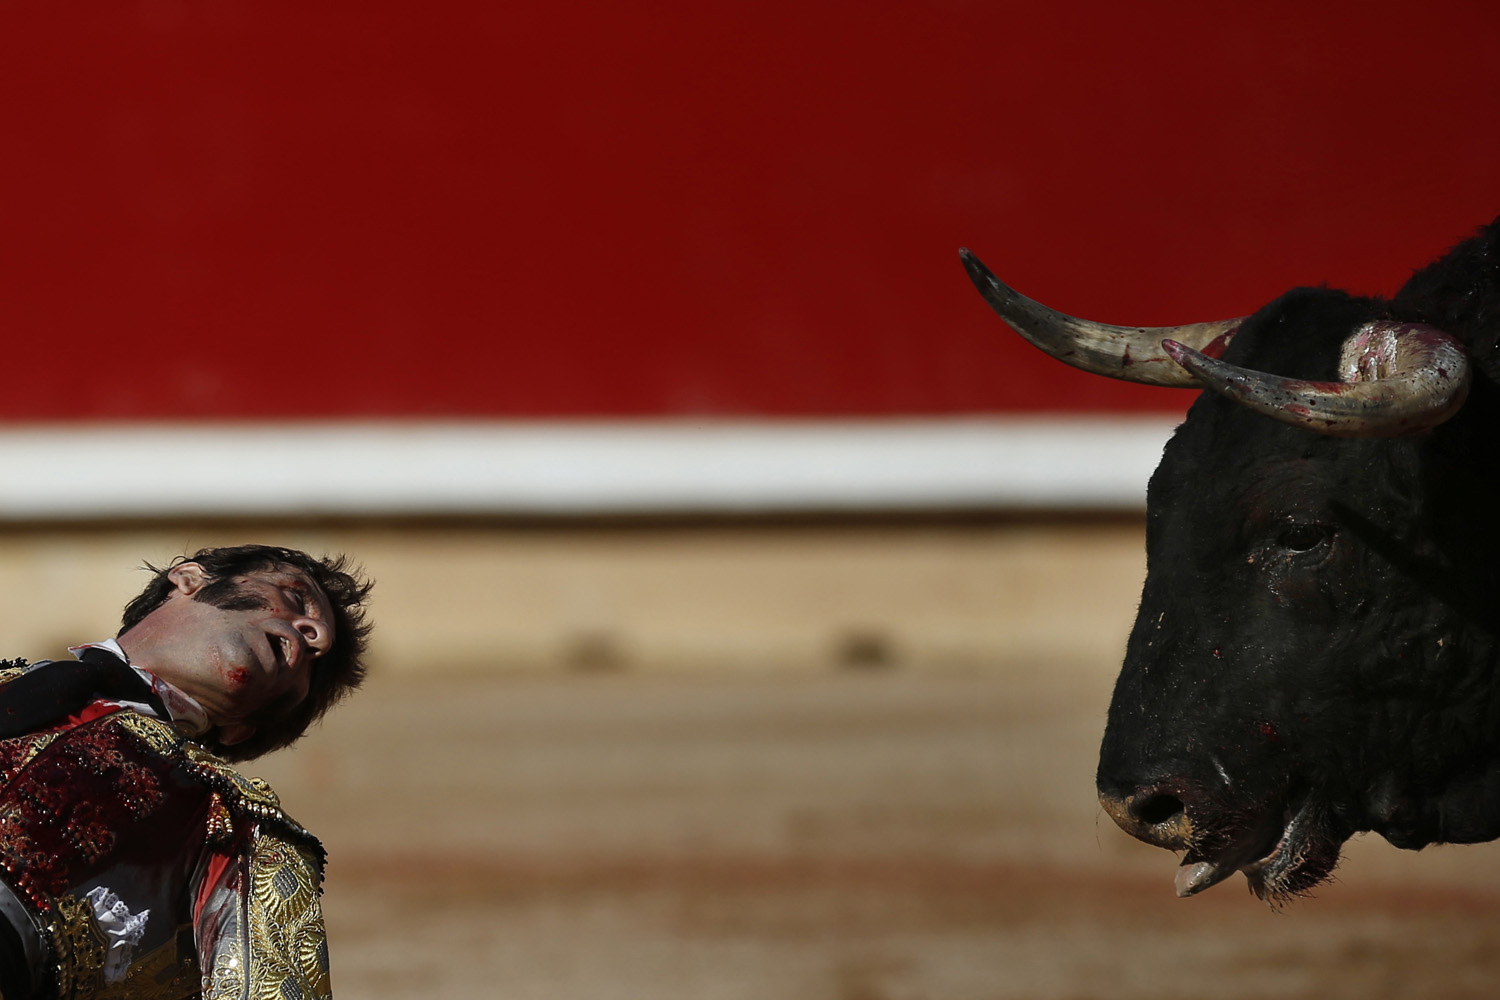 July 13, 2013. Spanish bullfighter Juan Jose Padilla turns his head to look at a bull as he kneels down during the seventh bullfight of the San Fermin festival in Pamplona, Spain.